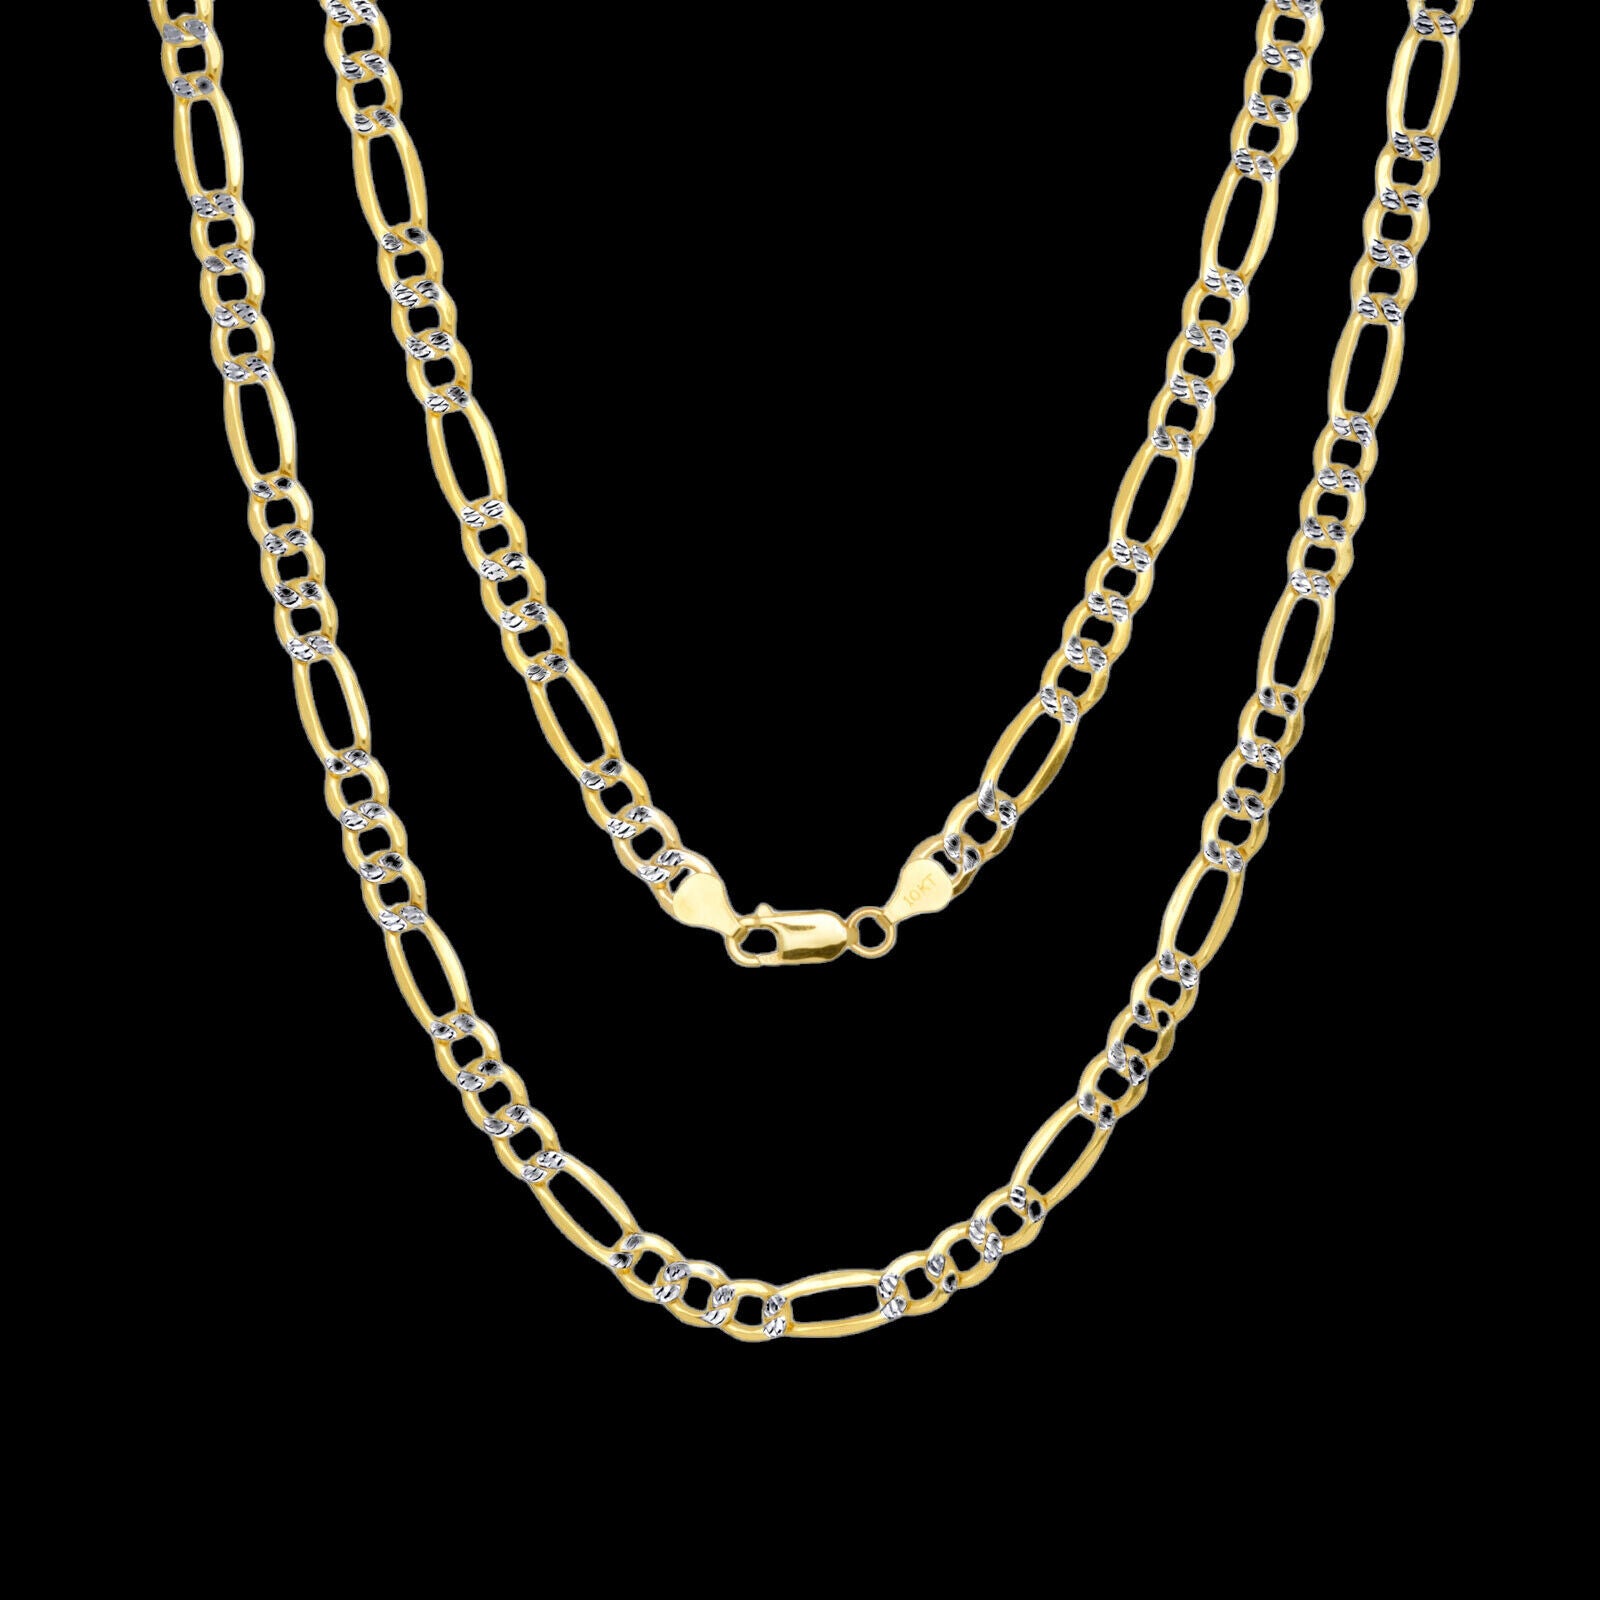 Real 10k Gold Chain Figaro Link Necklace 3.5mm-9mm, Men Women 18"-30" Inch, 10kt